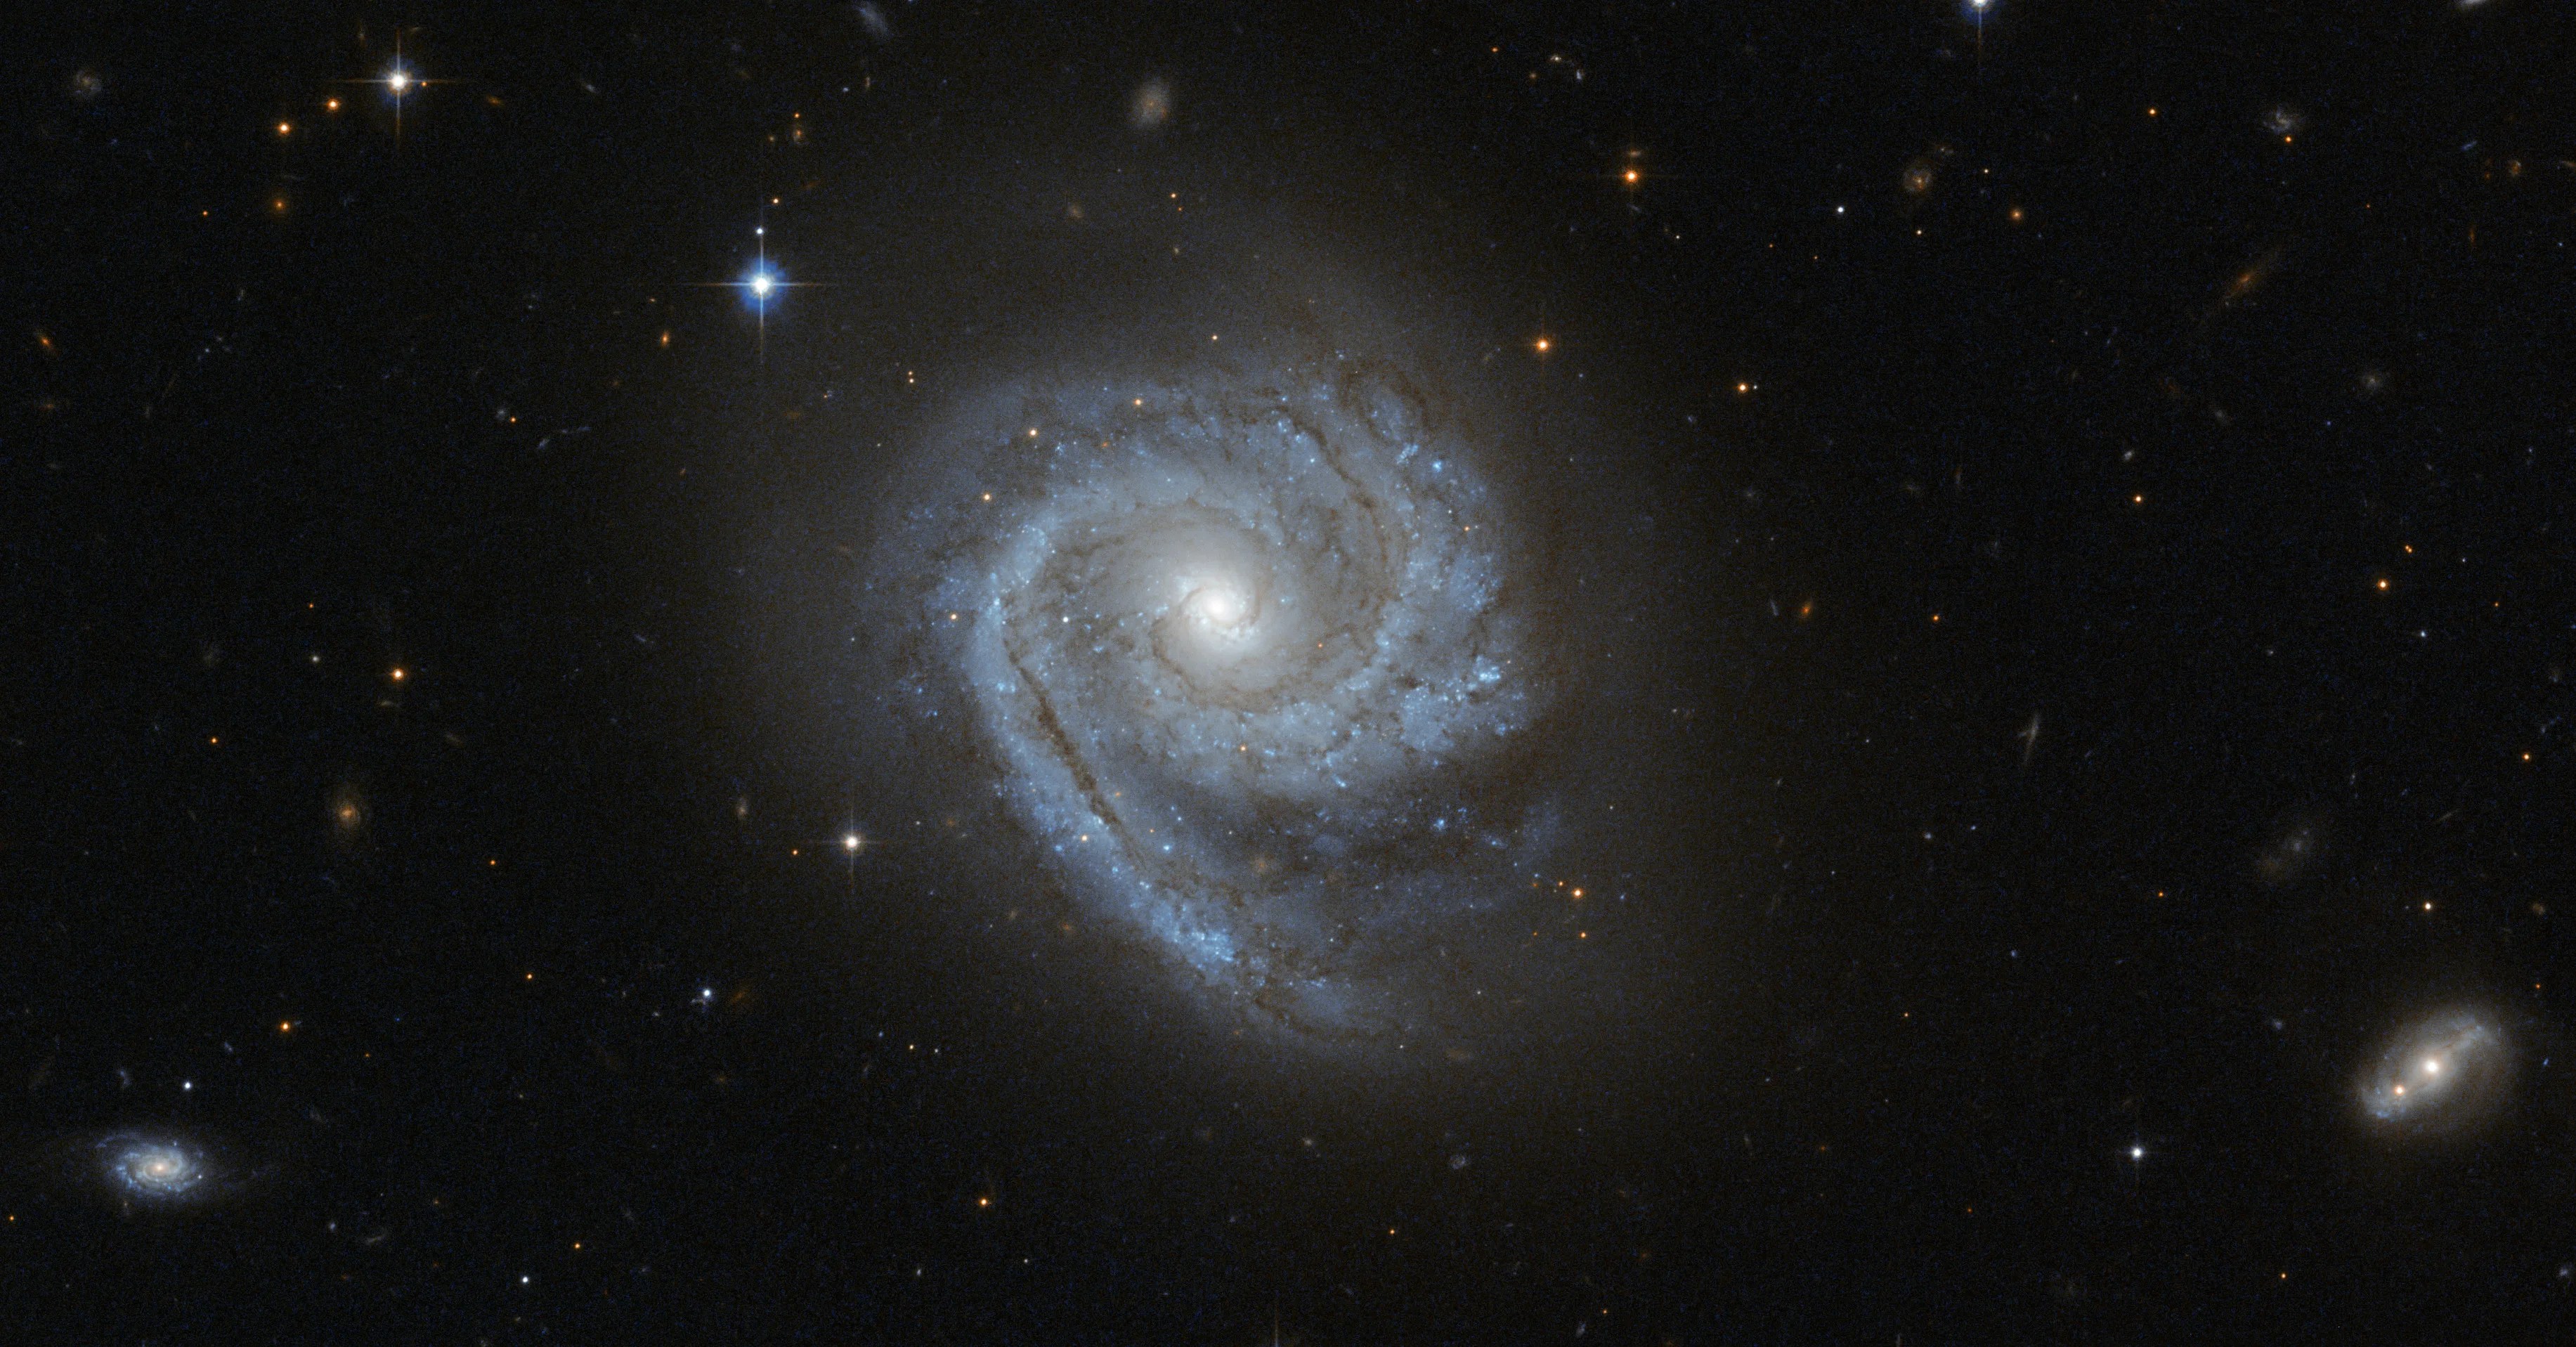 ESO 498-G5's luminous spiral arms with dark filaments wind all the way in to the center